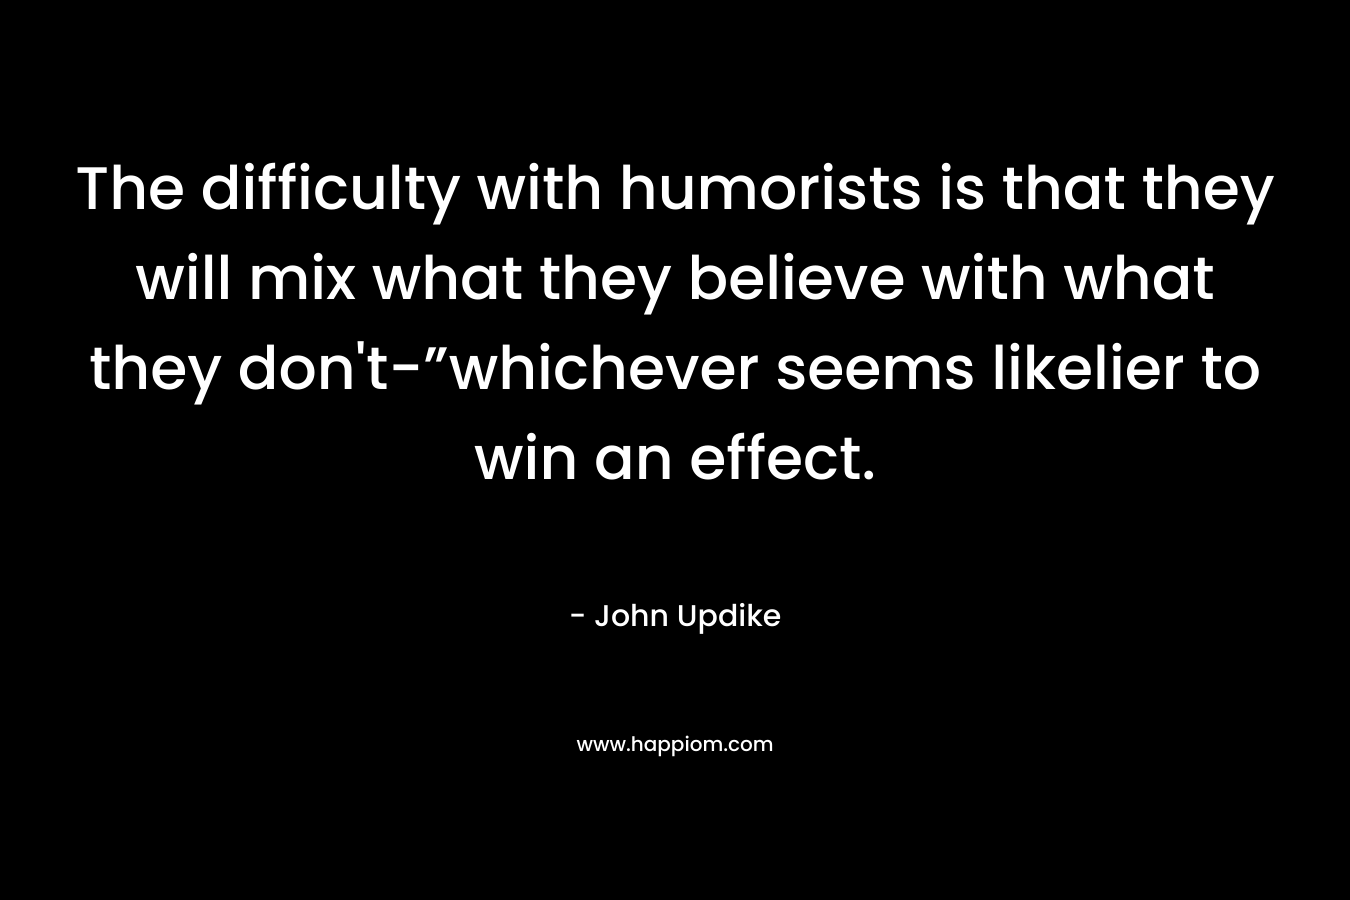 The difficulty with humorists is that they will mix what they believe with what they don’t-”whichever seems likelier to win an effect. – John Updike